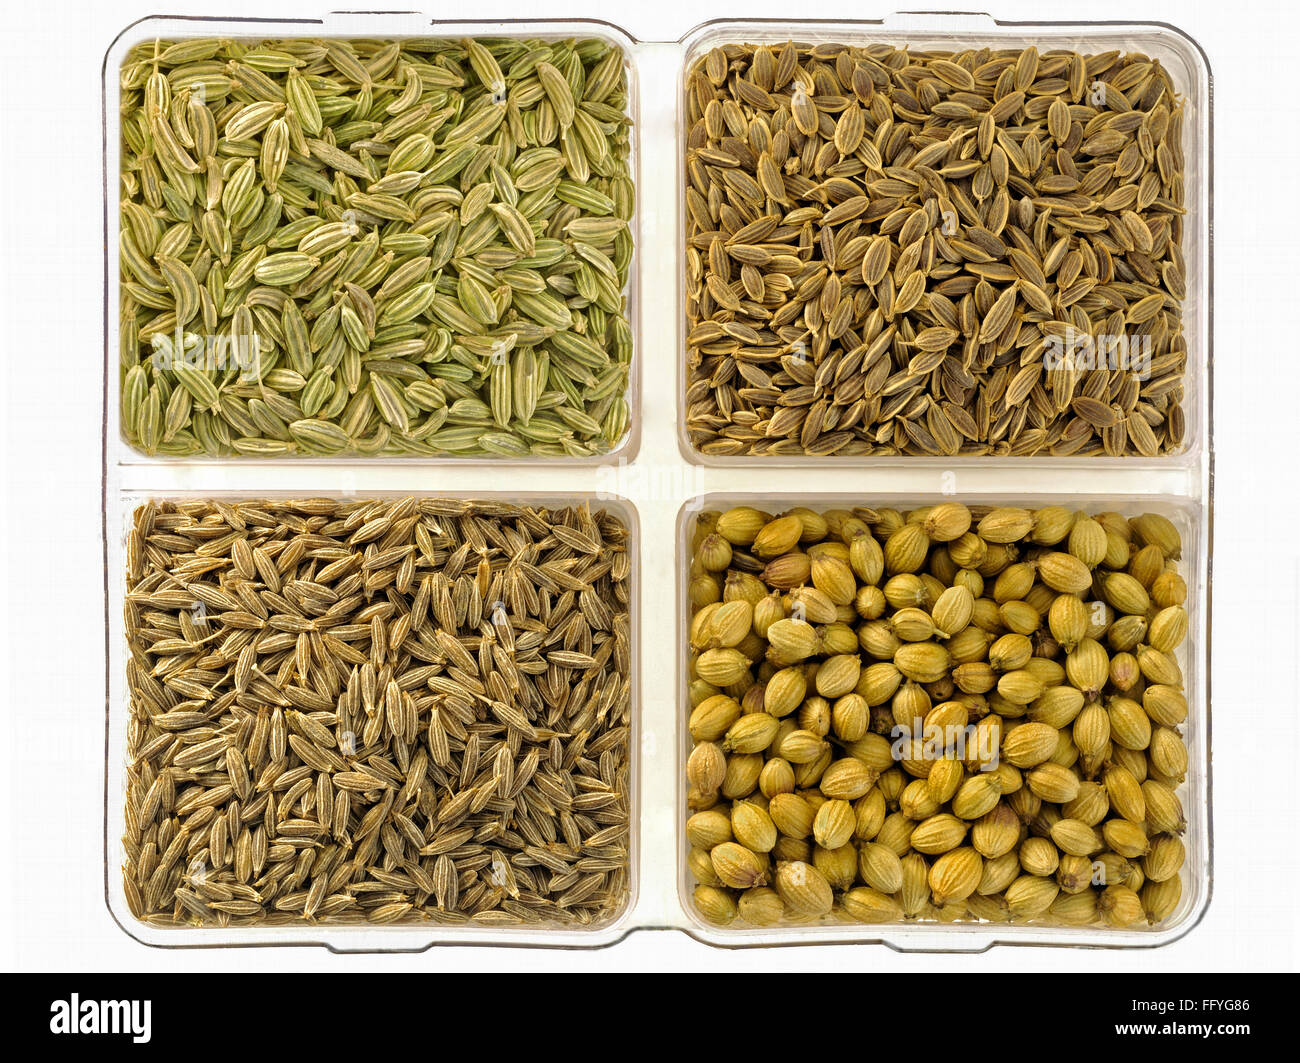 Spices fennel seeds dill seeds coriander seeds and cumin seeds ; India Stock Photo